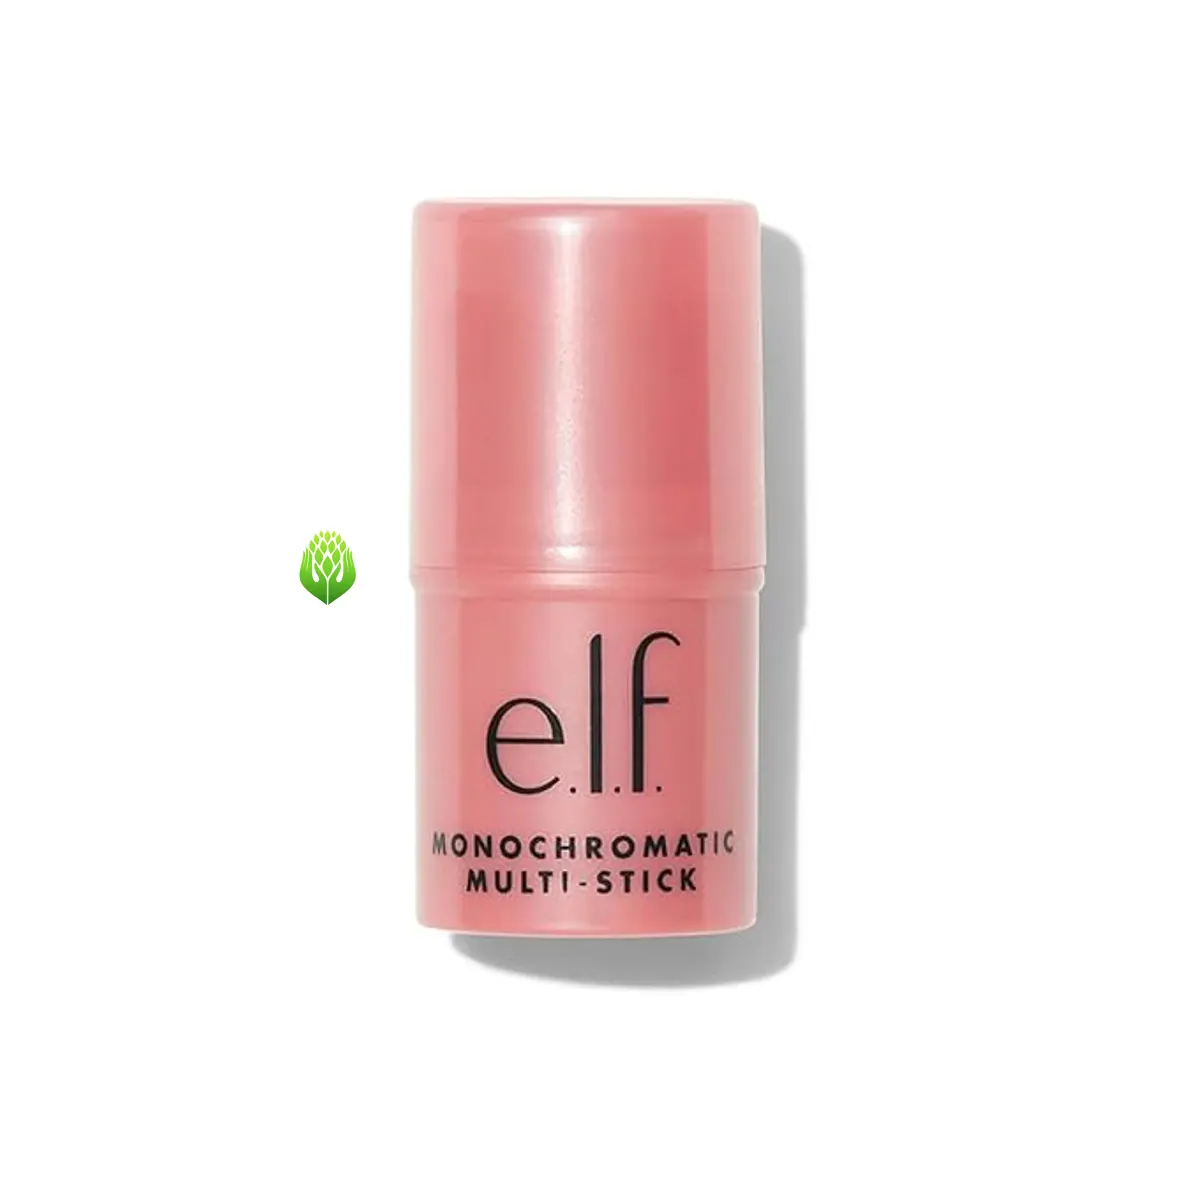 E l f Monochromatic Multi Stick, Creamy & Blendable Color, For Eyes, Lips & Cheeks, 5g Works as an Eyeshadow, Lipstick, Blush